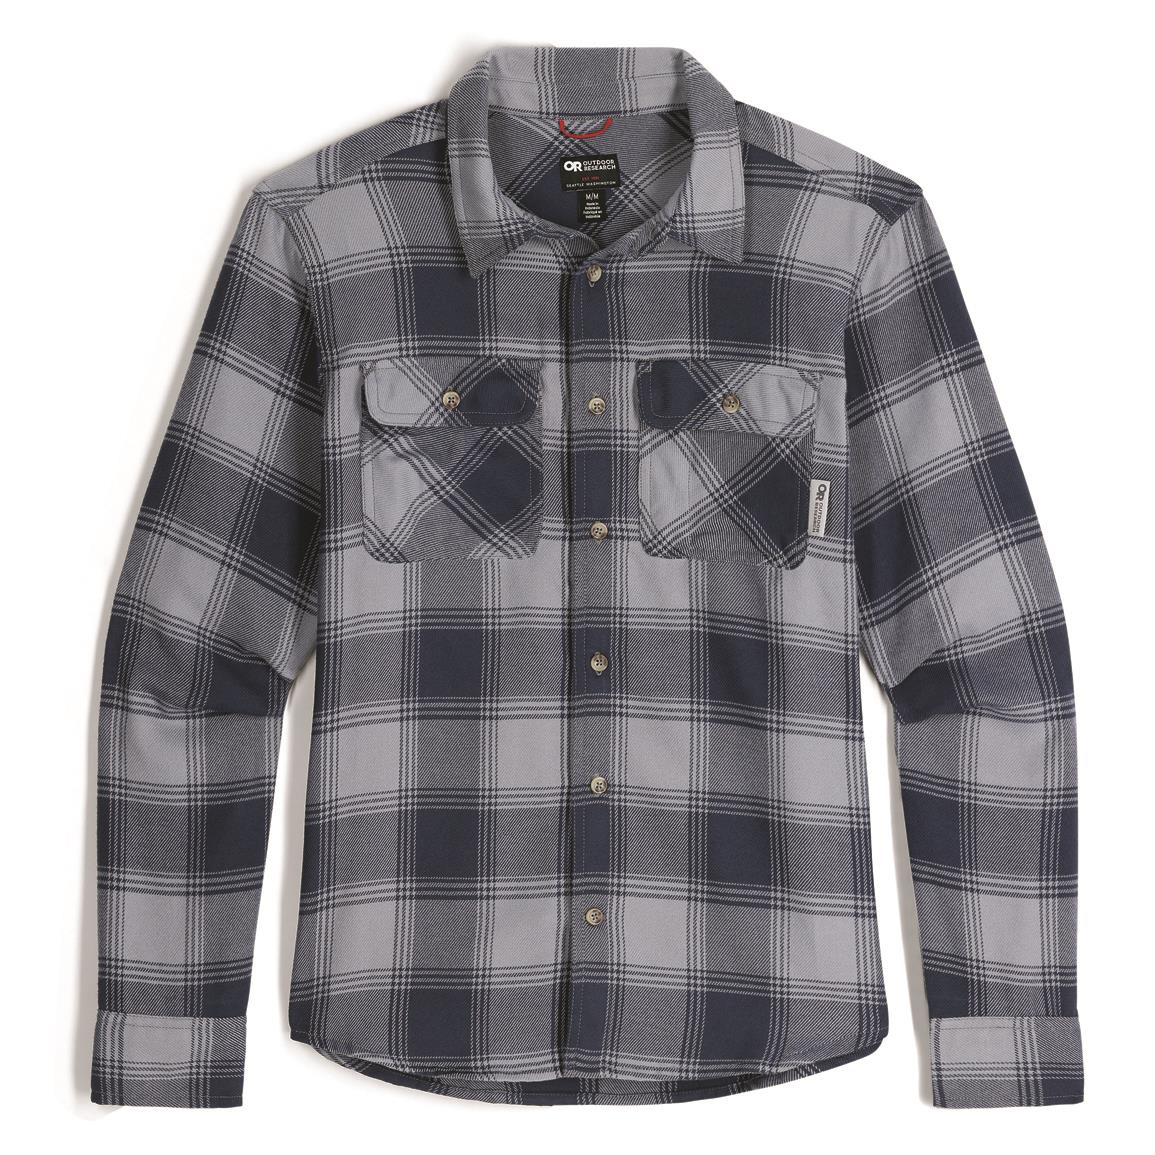 Outdoor Research Men's Feedback Flannel Twill Shirt, Slate Plaid